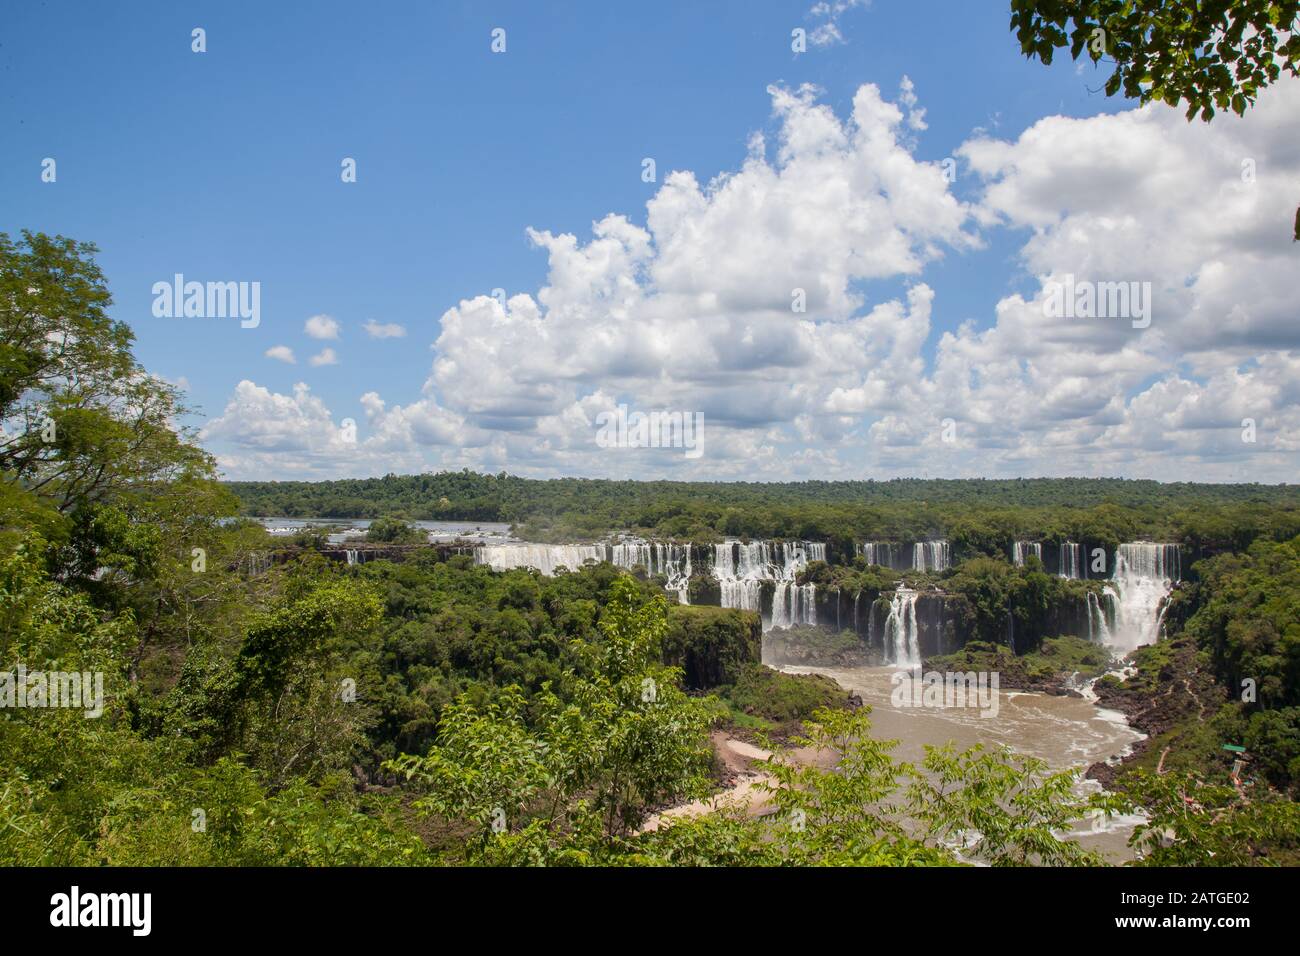 Foz de Iguaçu, world famous waterfall in Brazil and Argentina flowing with heavy rushing water Stock Photo